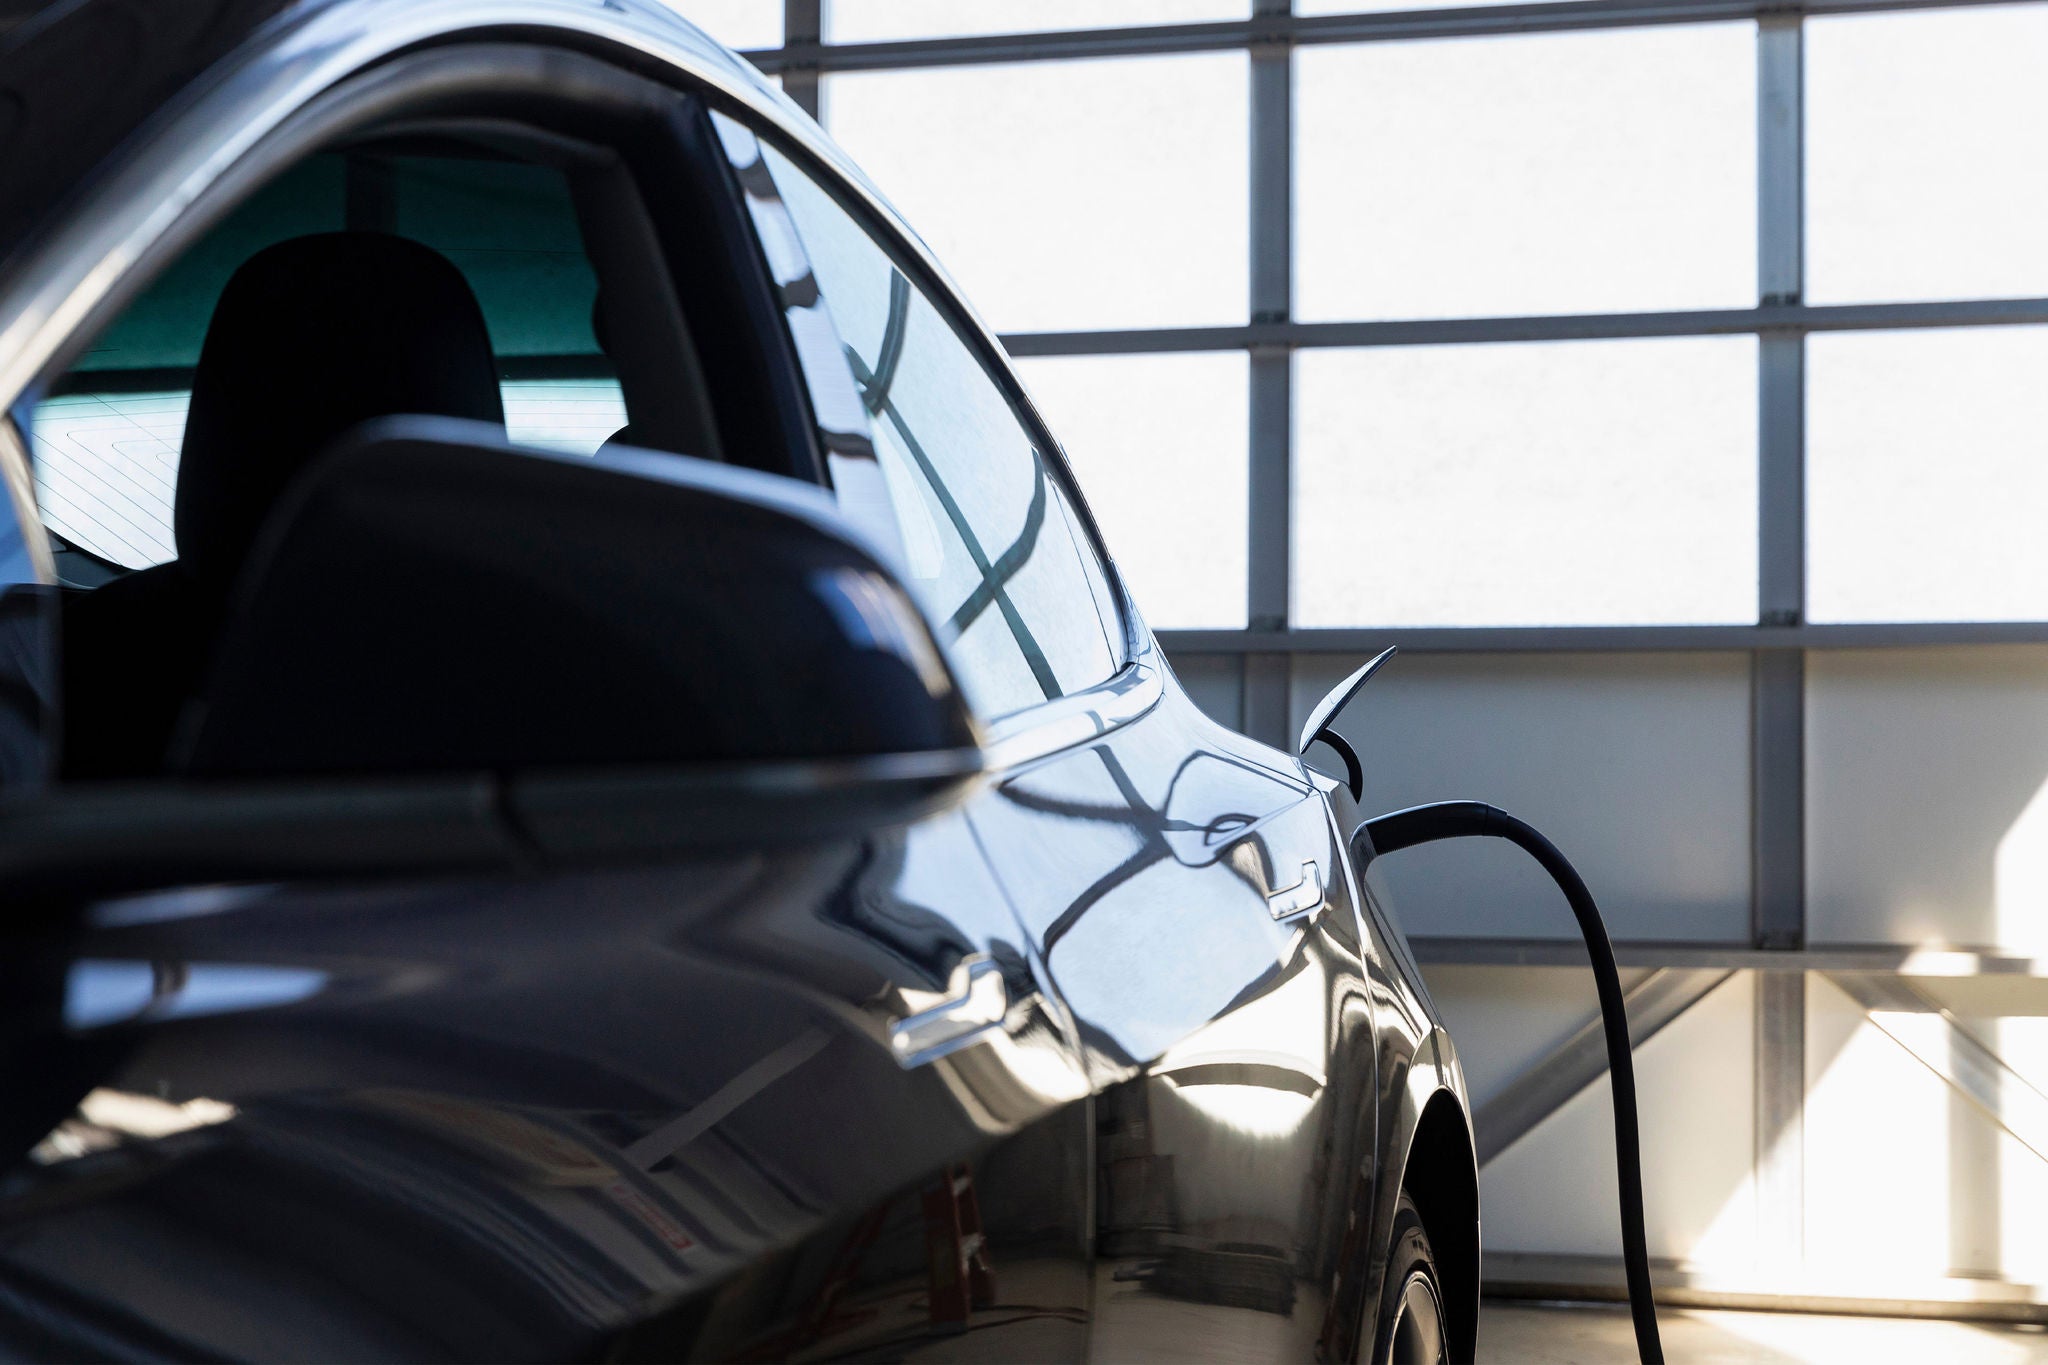 Closeup of an electric car parked indoors with a charging cable connected. A garage door is visible in the background.